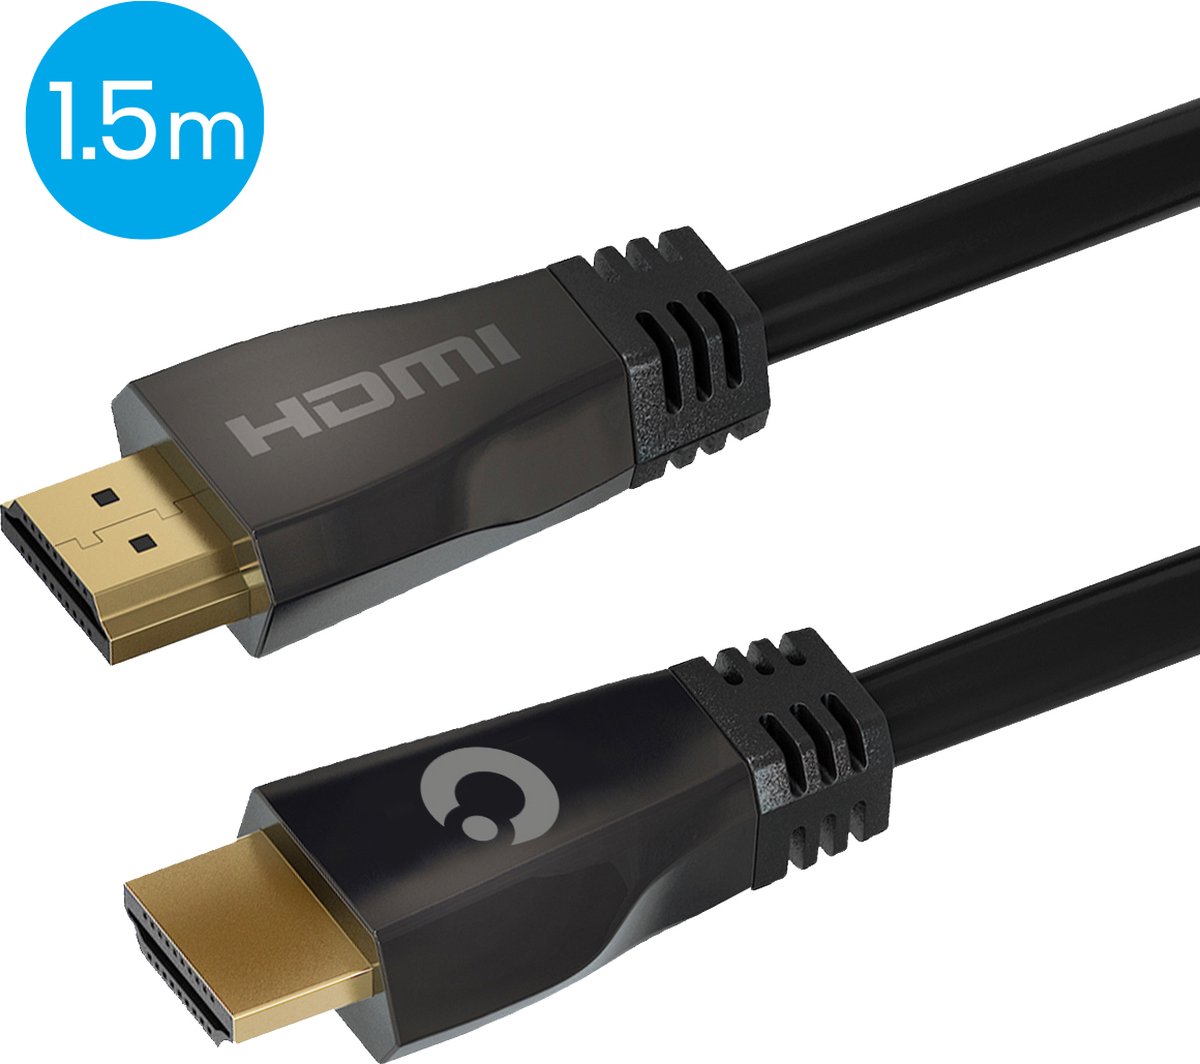 Auronic HDMI Ultra High Speed 2.1 Kabel - Ethernet - Male to Male Cable - Zwart - 1.5 meter - Auronic